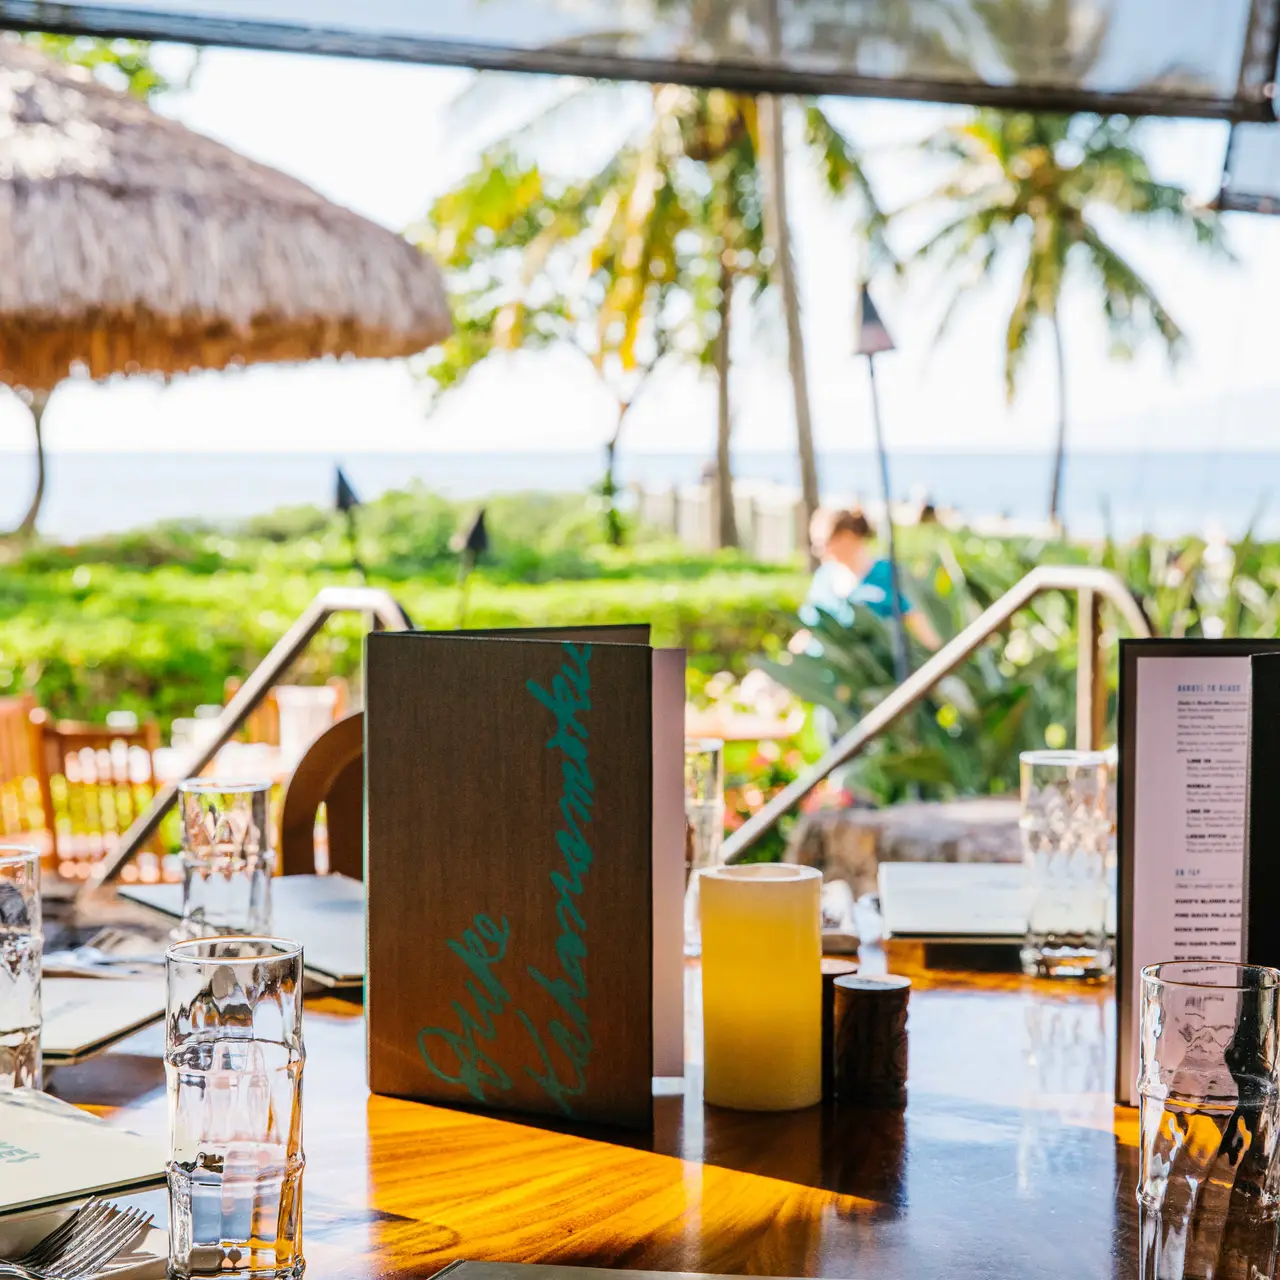 Duke's Beach House is a Restaurant located in the city of Kaanapali on Maui, Hawaii